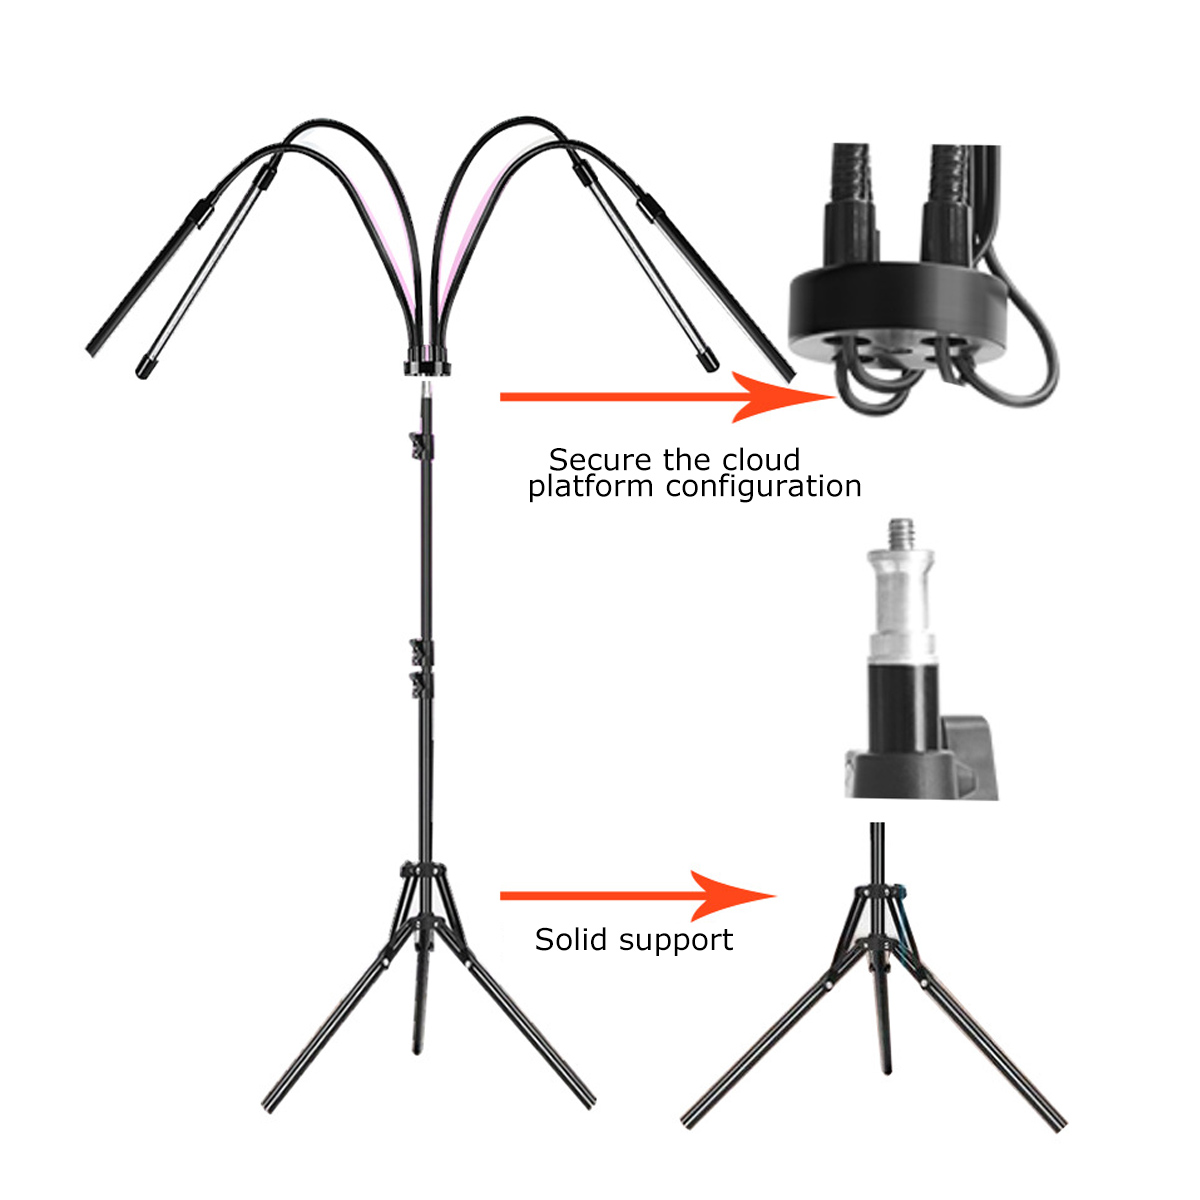 Remote-Control-4-Heads-LED-Grow-Light-Plant-Growing-Lamp-Lights-with-Tripod-for-Indoor-Plants-1836992-9